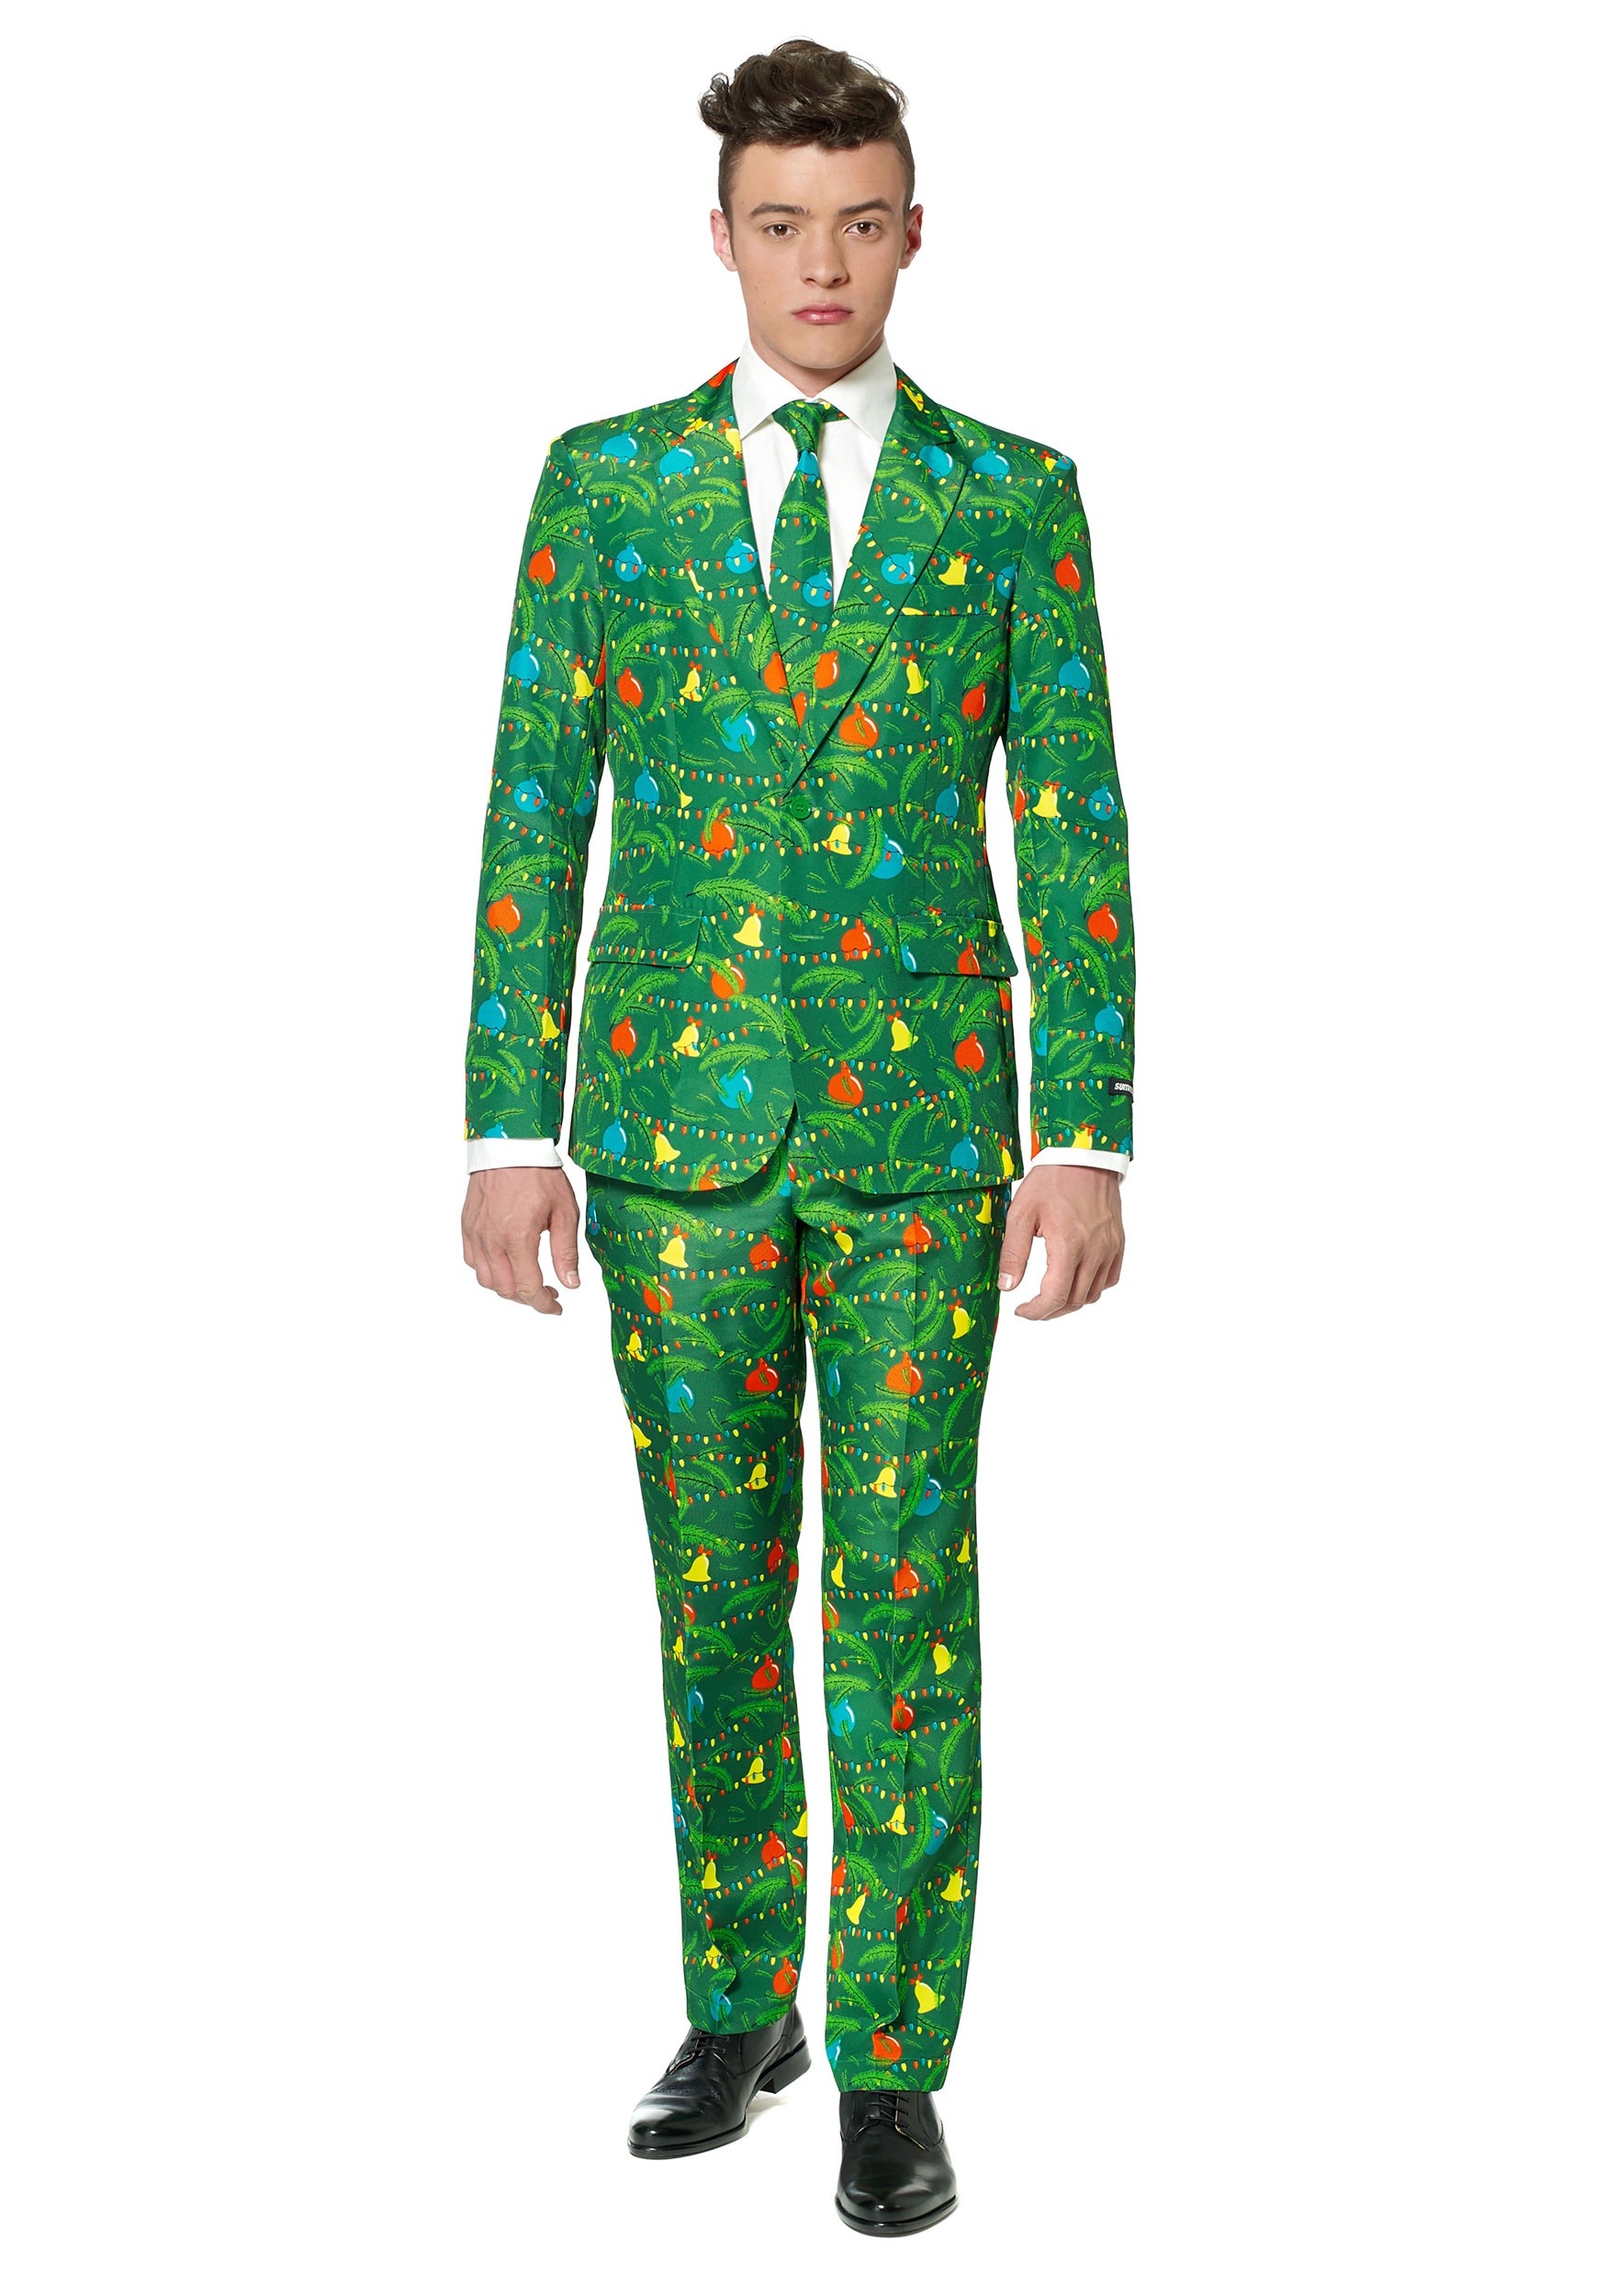 Image of Green Christmas Tree Suitmeister Suit for Men ID OSOBAS0015-M